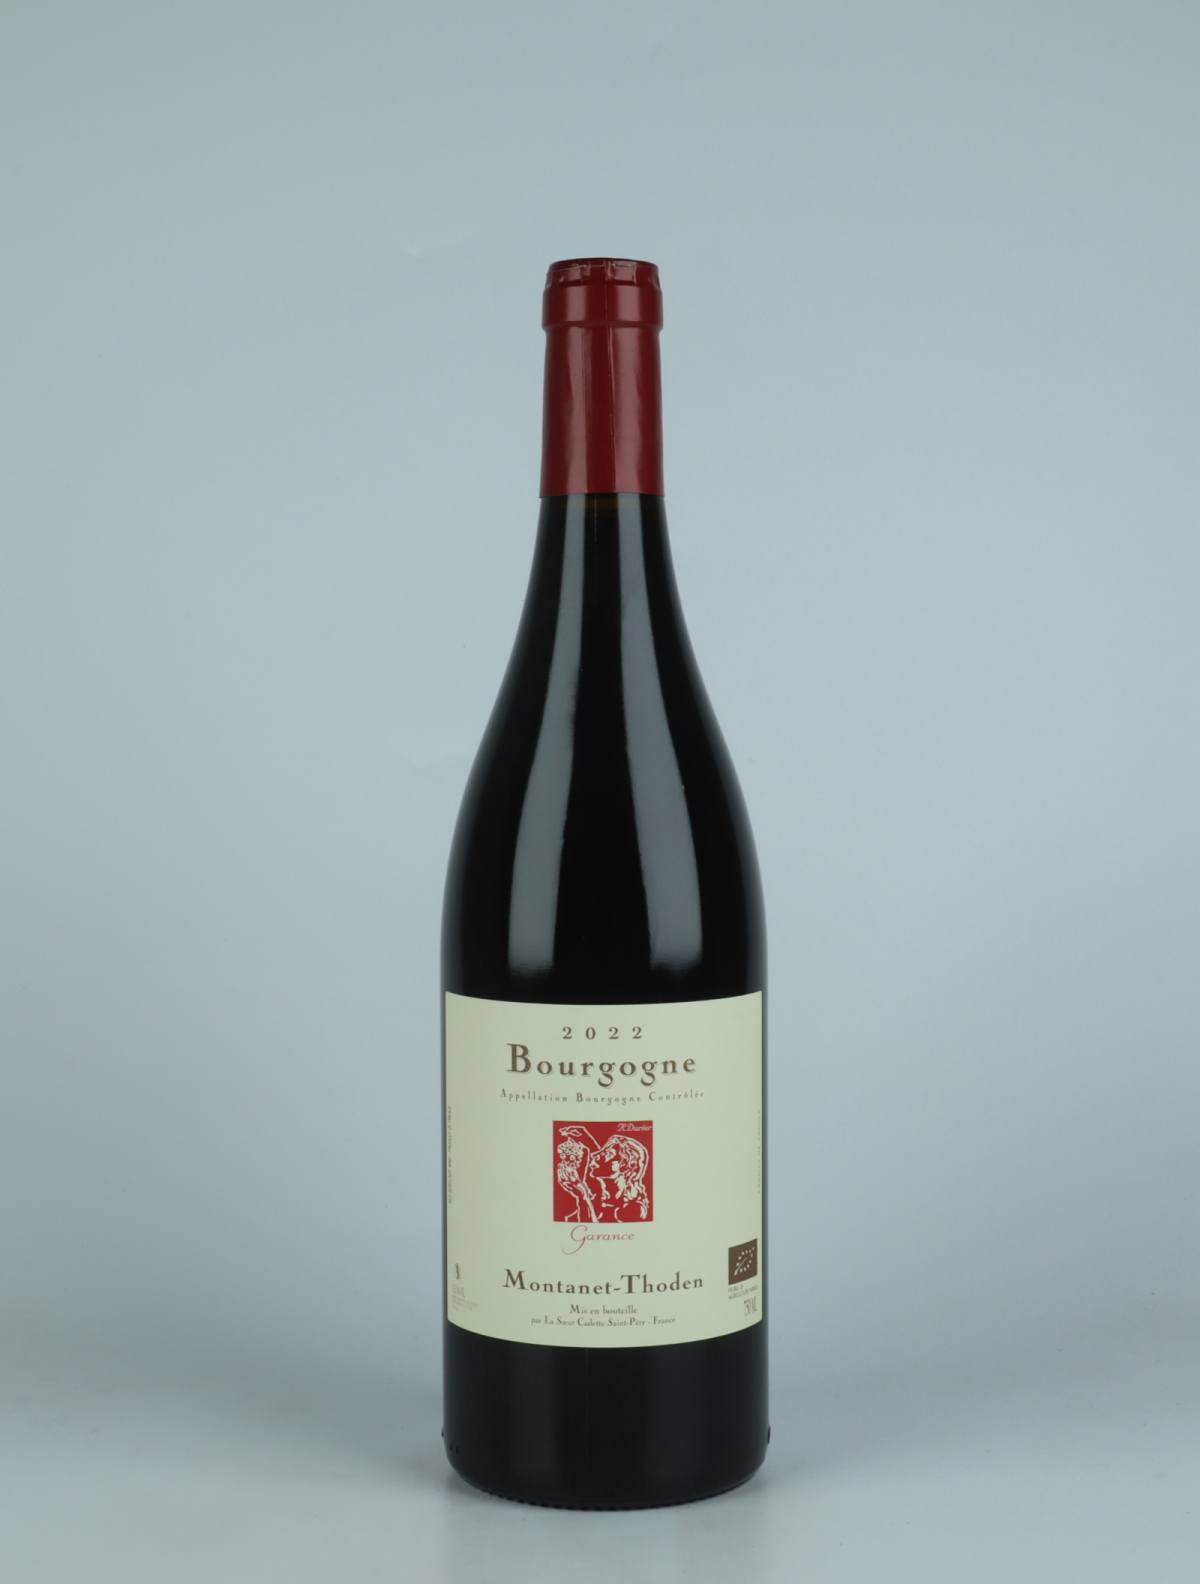 A bottle 2022 Bourgogne Rouge - Garance Red wine from Domaine Montanet-Thoden, Burgundy in France